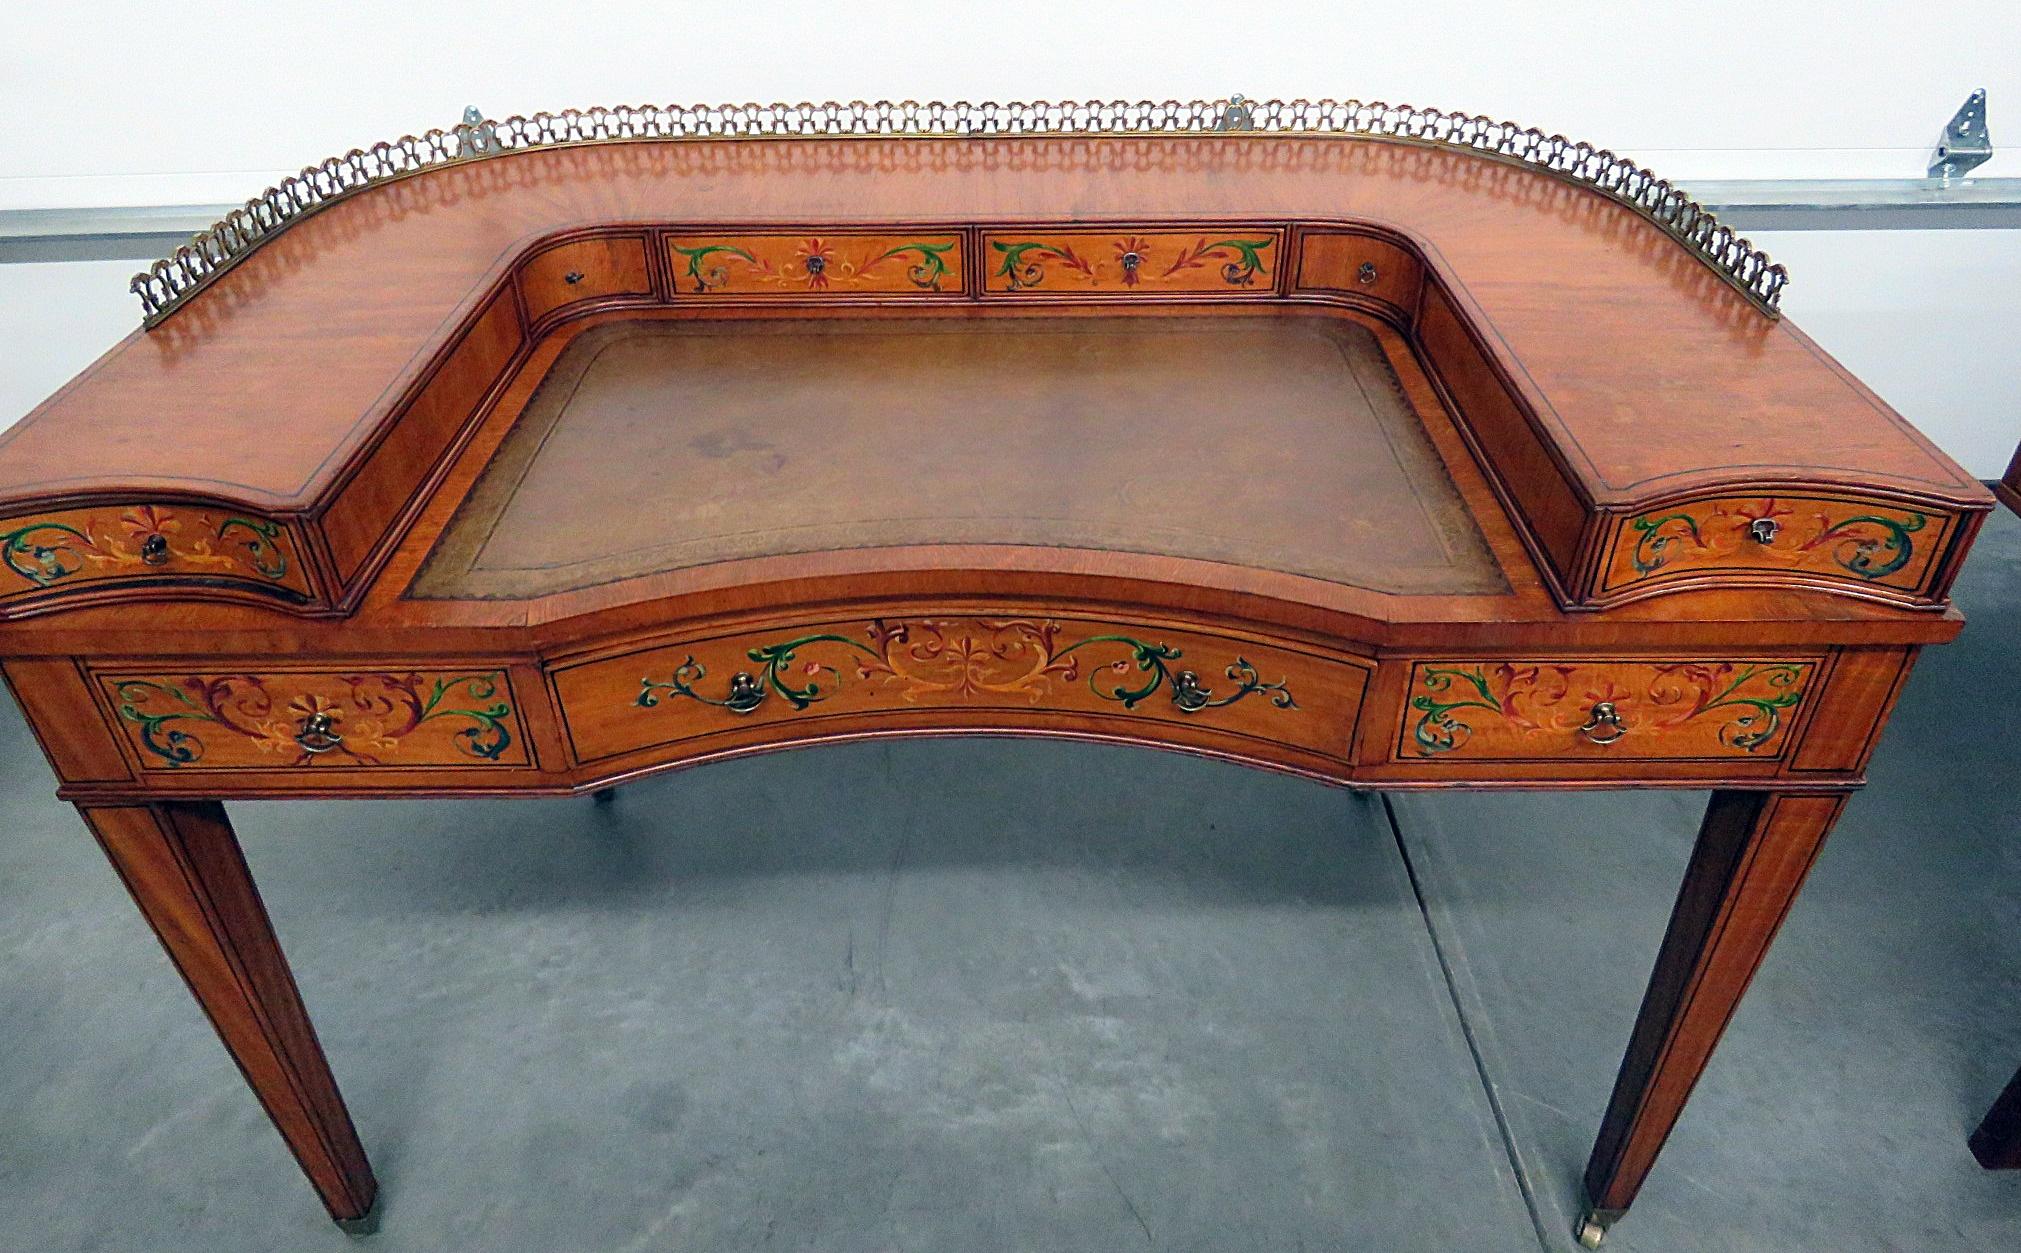 20th Century English Edwardian Paint Decorated Adams Leather Top Writing Table Desk C1930